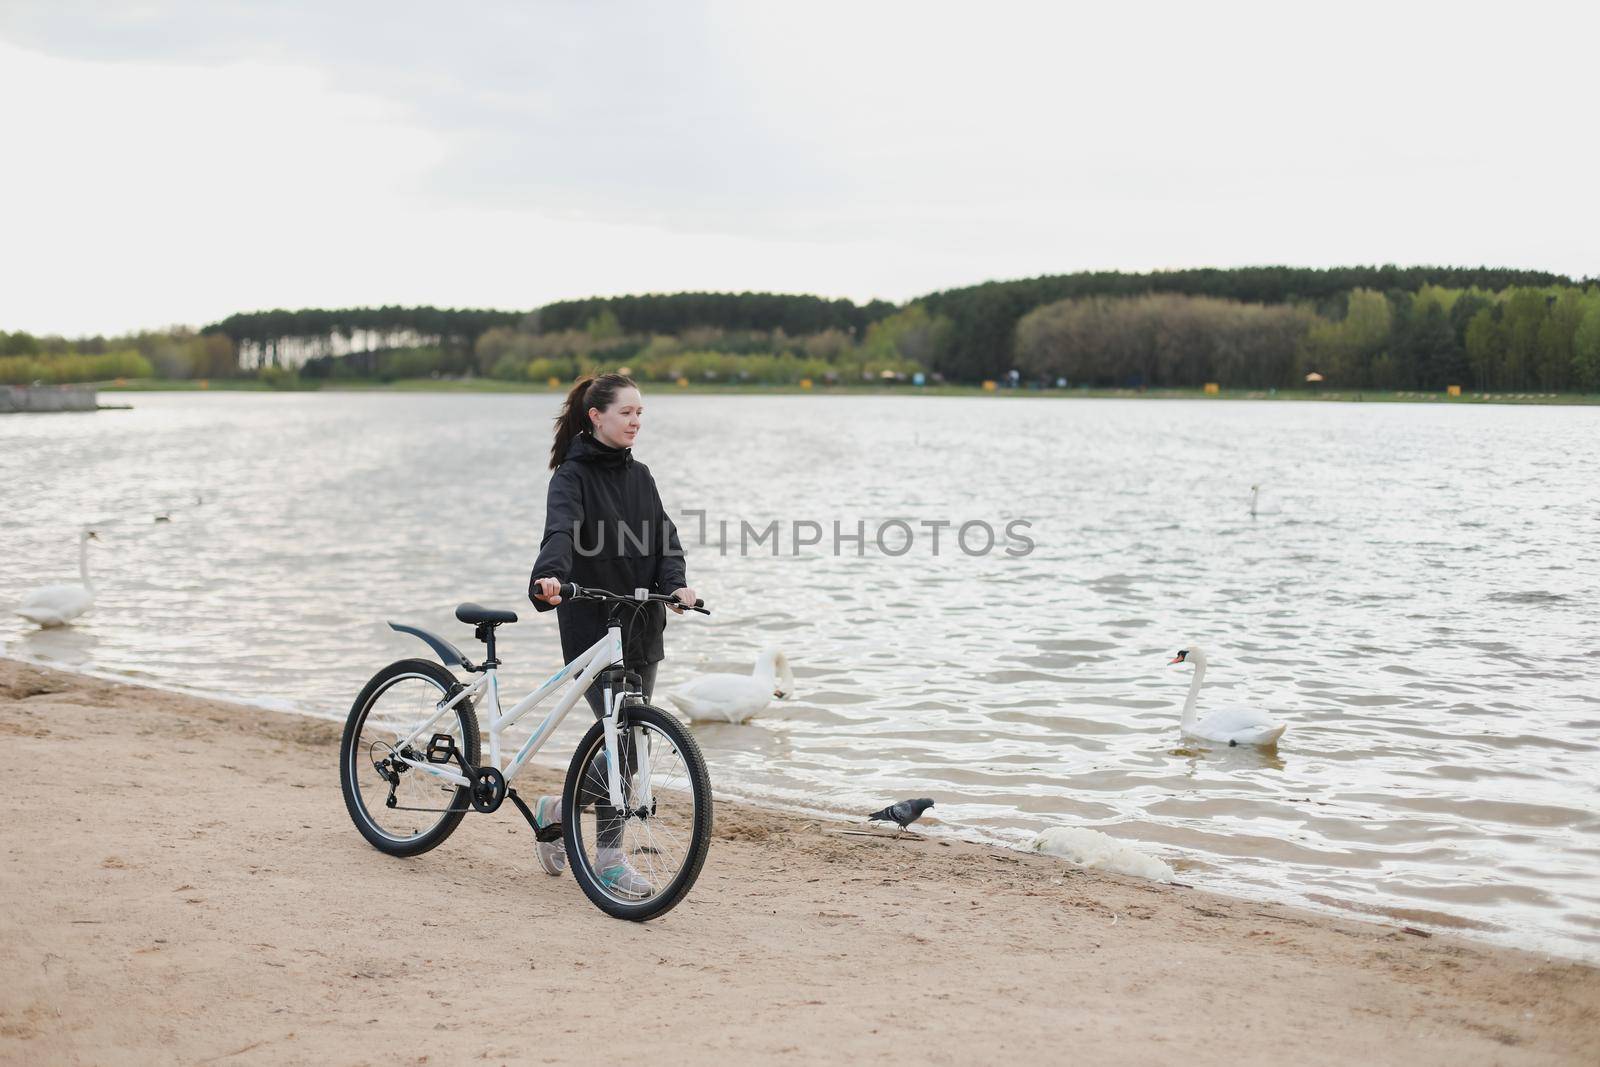 A young woman with a bicycle in the park.